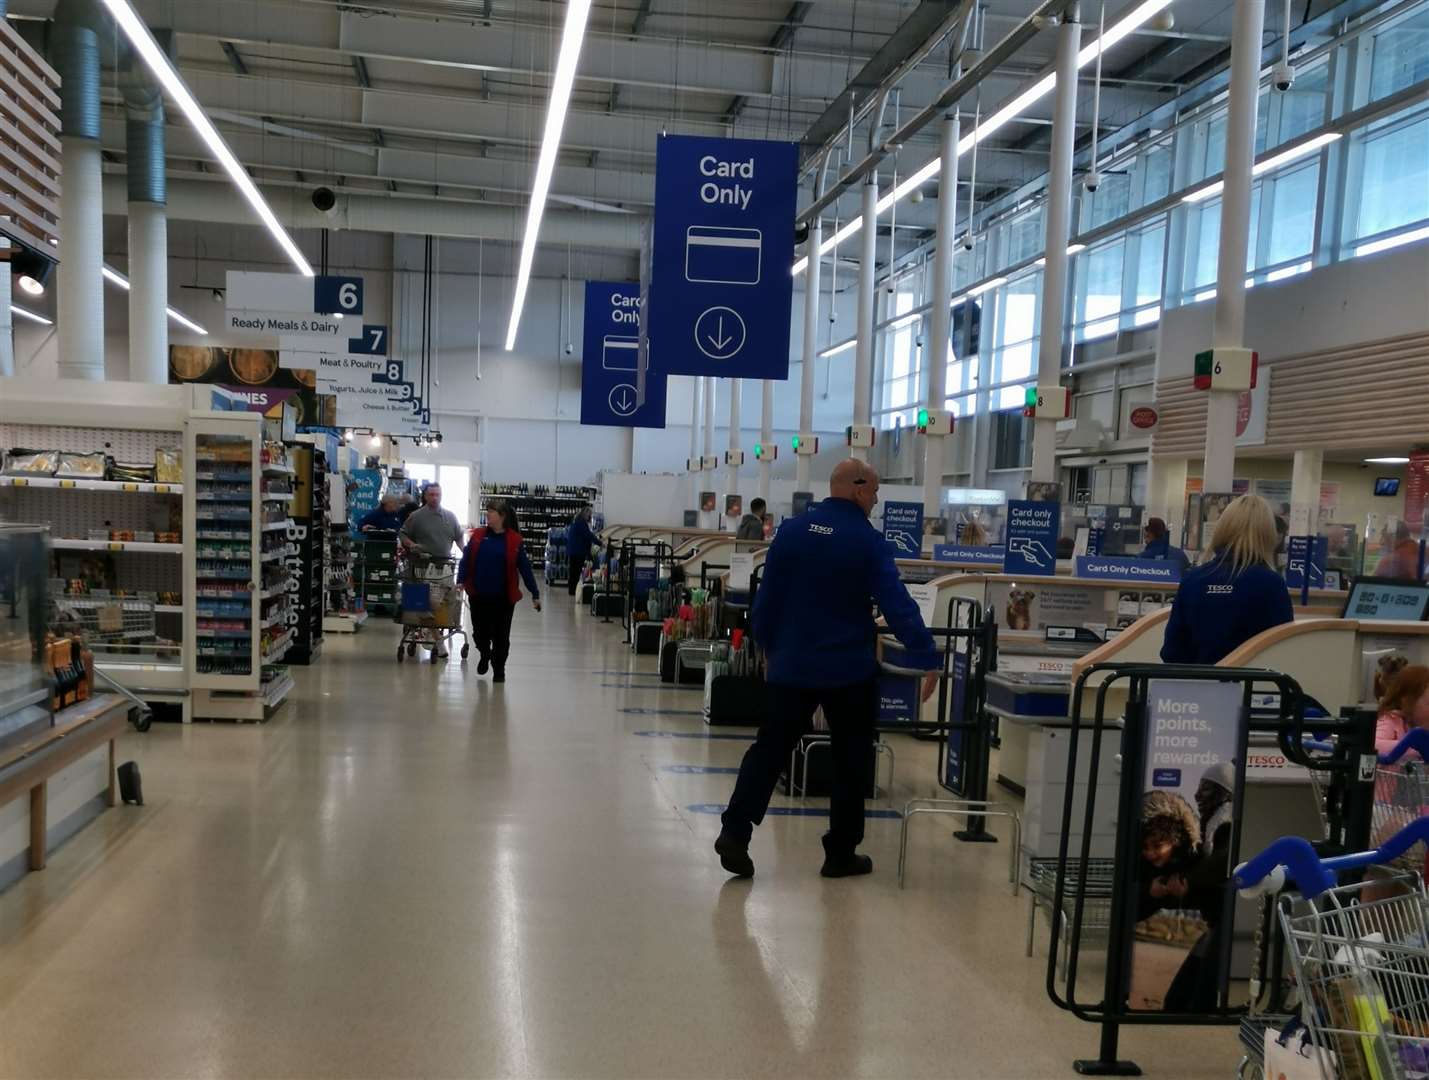 The large card-only signs at the checkouts in Tesco Extra